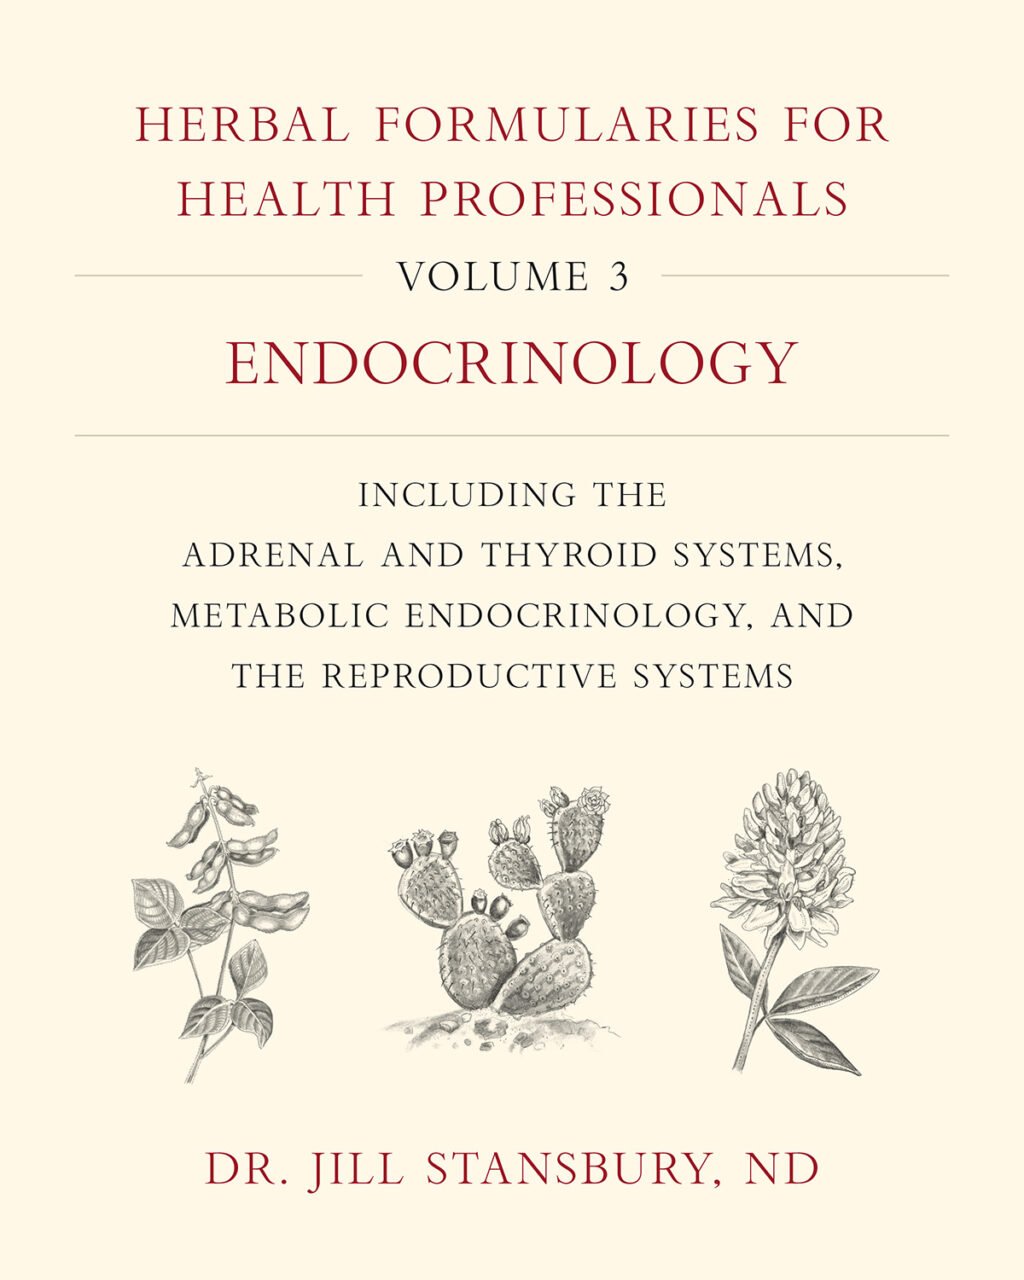 The Herbal Formularies for Health Professionals